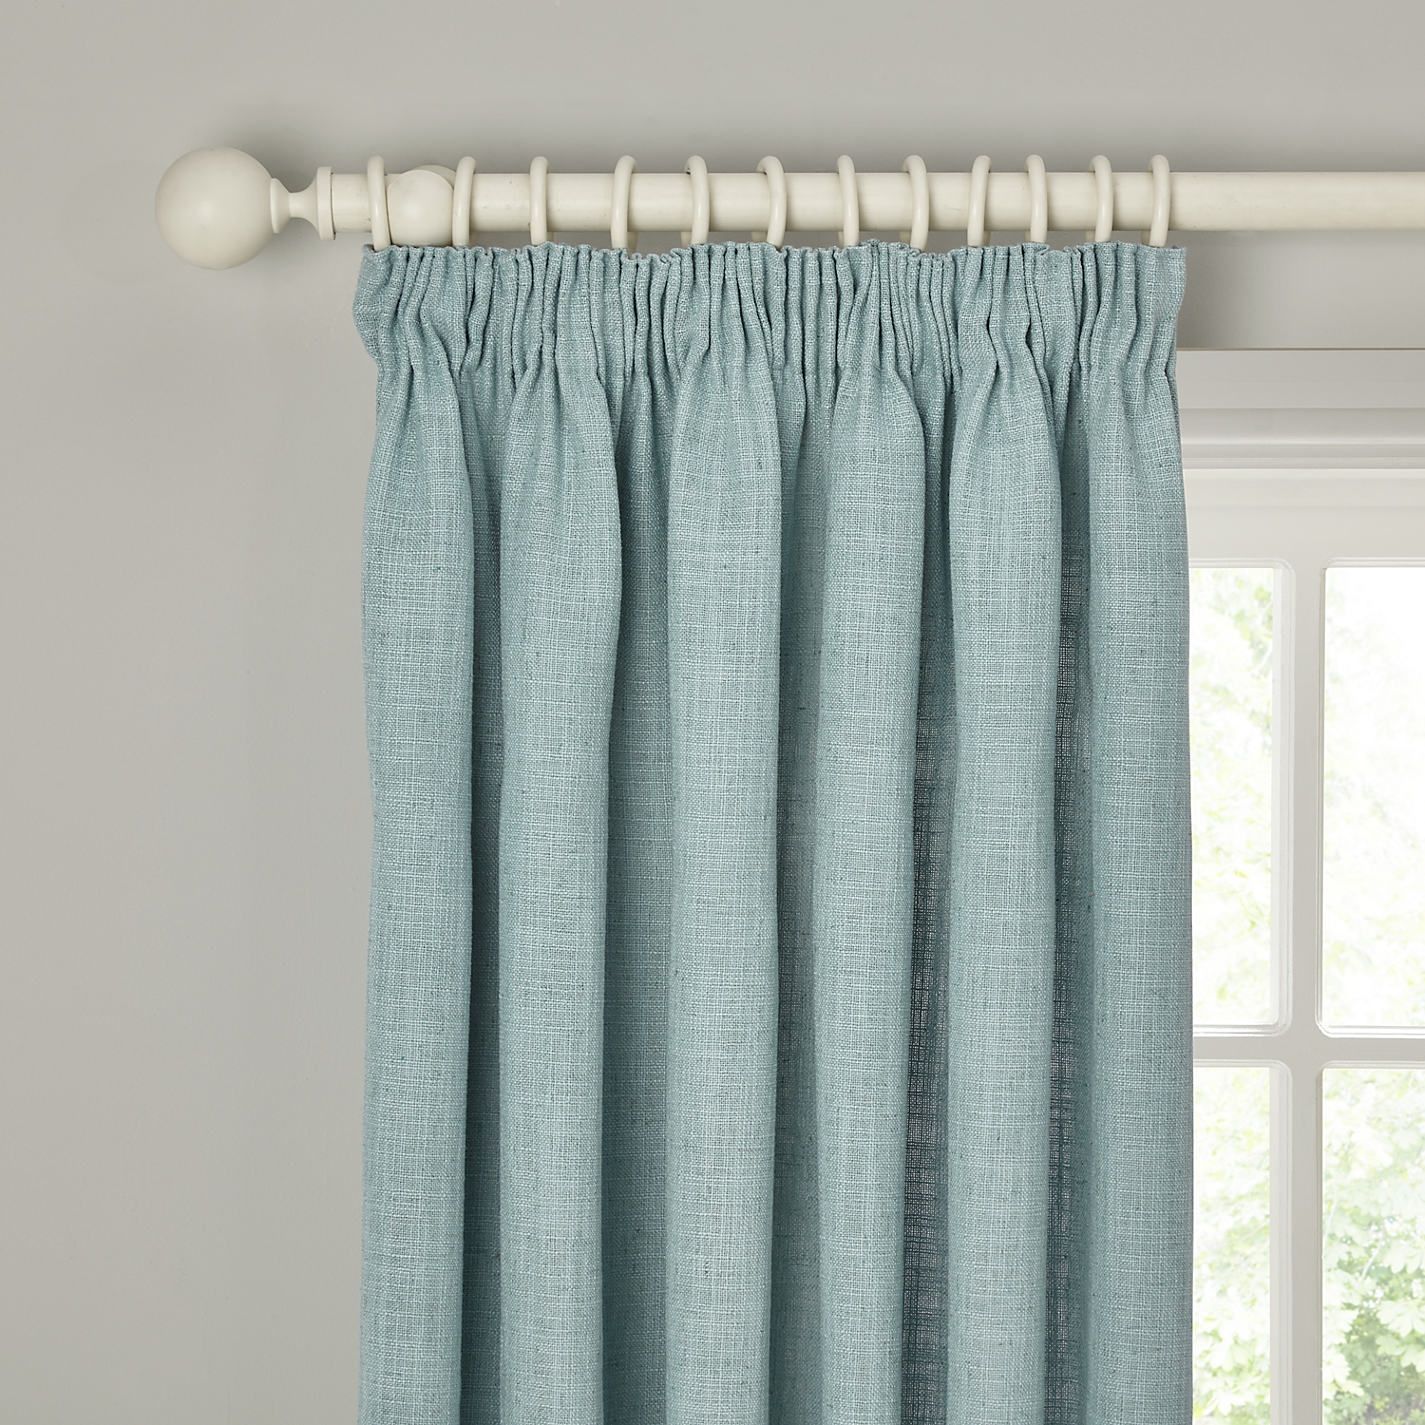 Lined Pencil Pleat Cotton Curtains Pencil Pleat Curtains Buying With Lined Cotton Curtains (View 7 of 15)